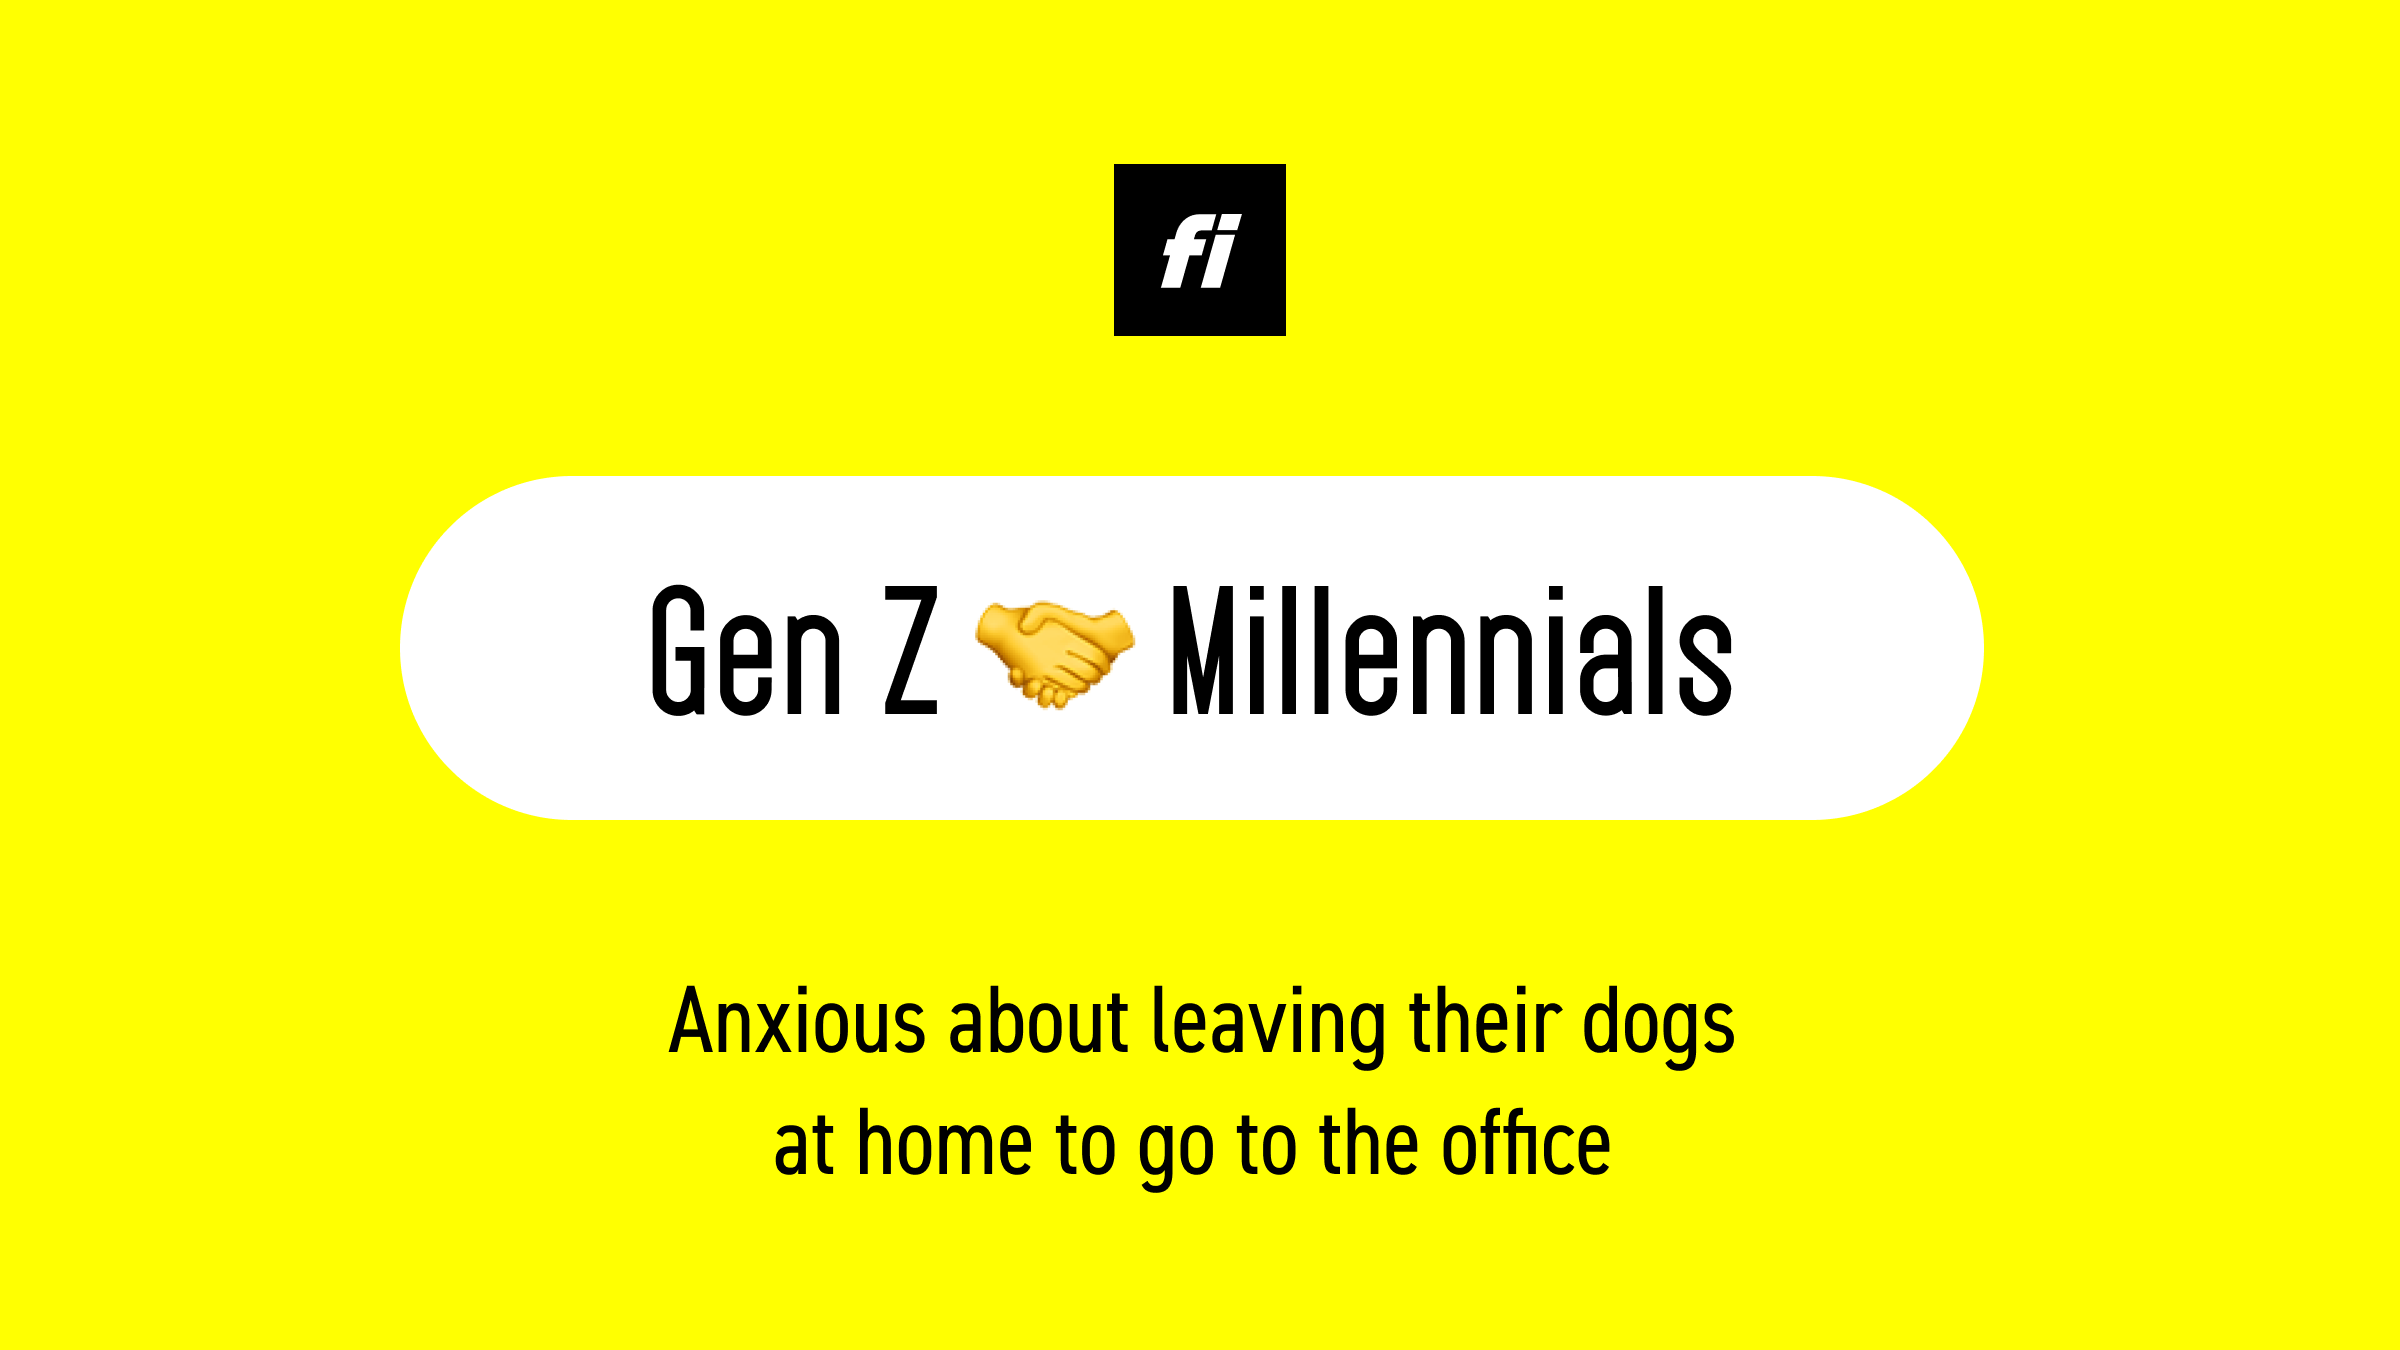 Gen Z and Millennials are anxious about leaving their dogs at home to go to the office